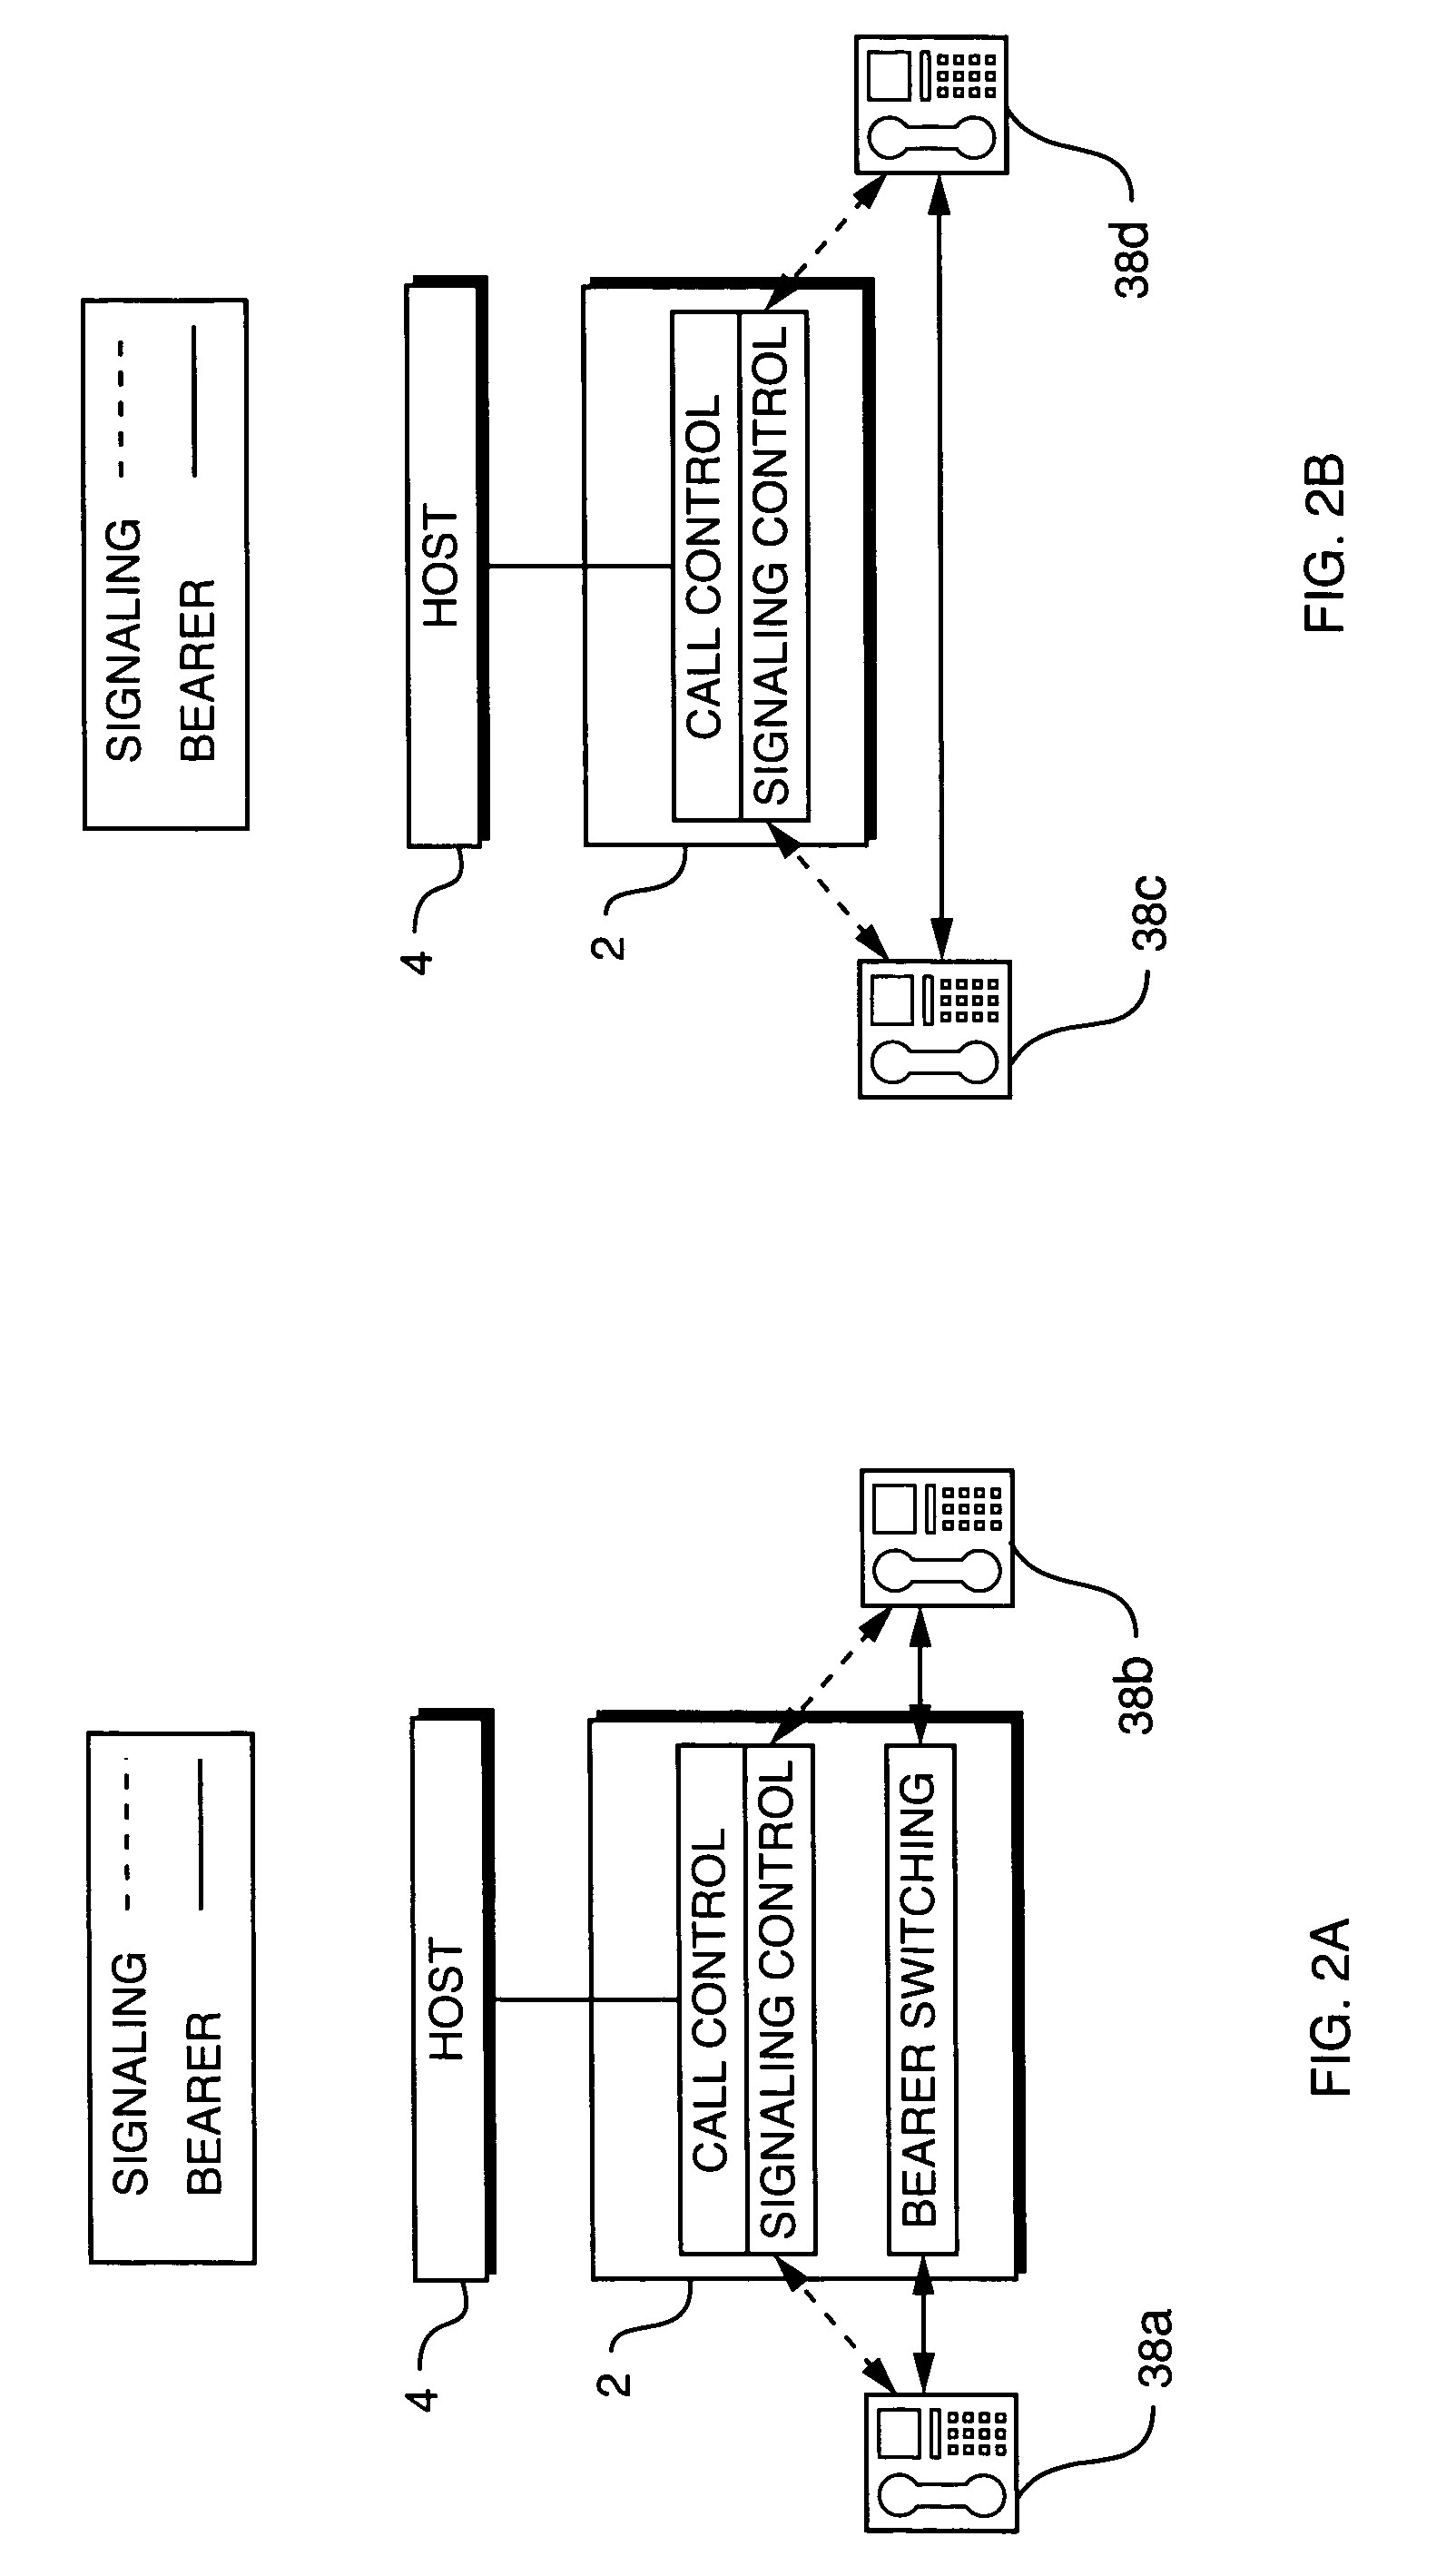 Hybrid switching architecture having dynamically assigned switching models for converged services platform